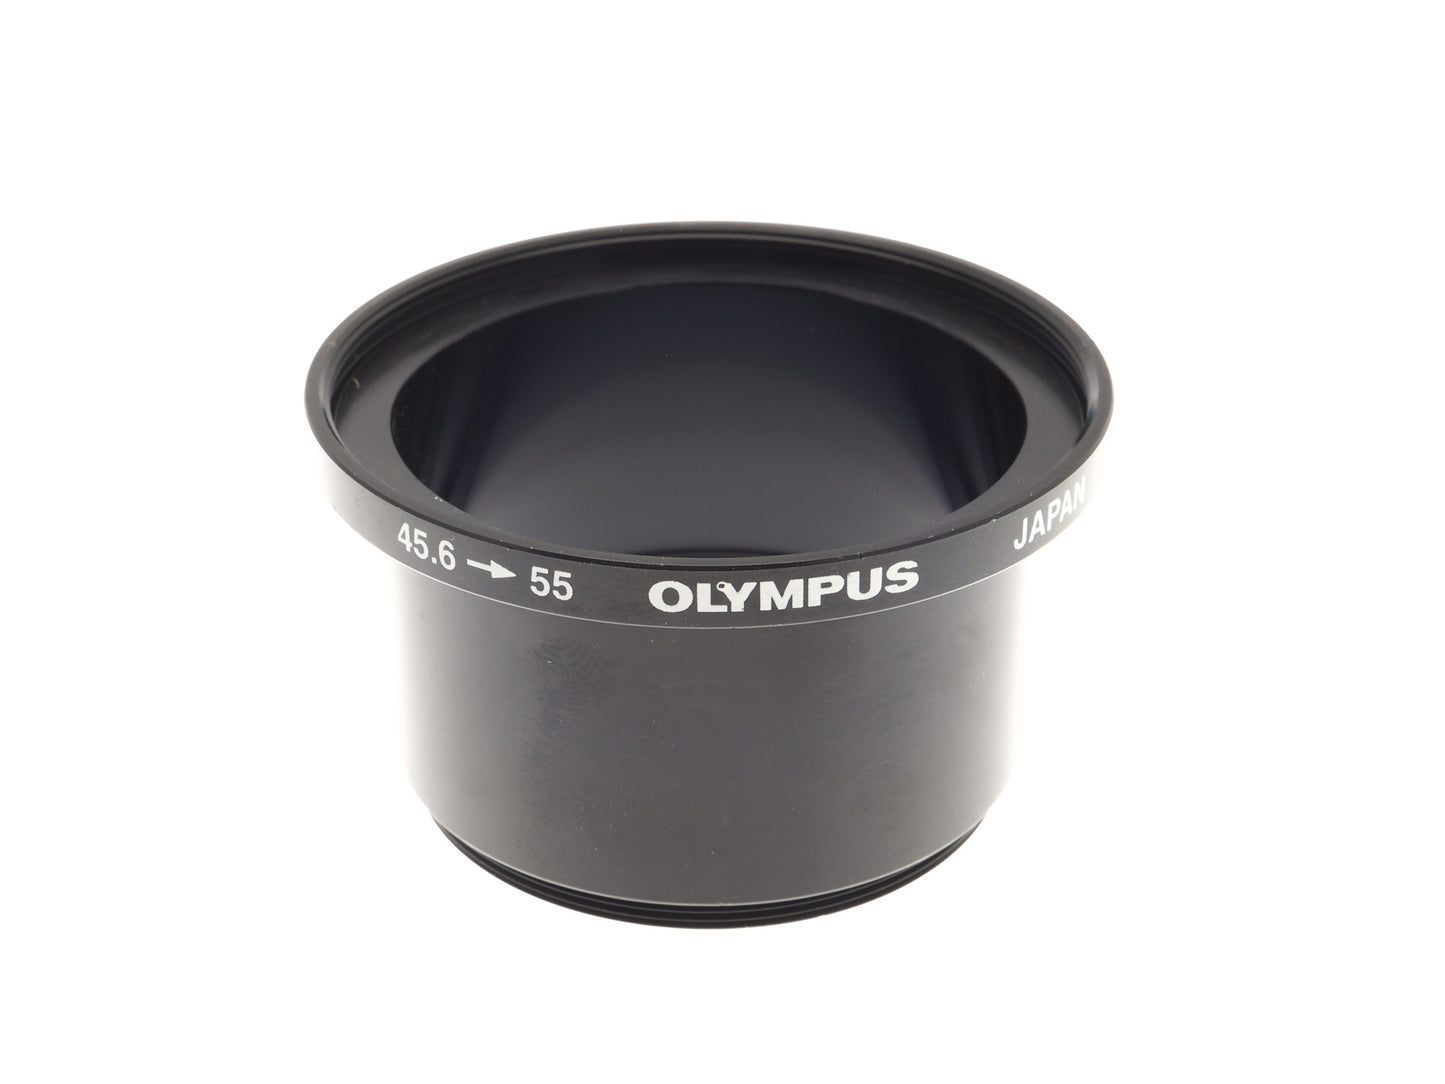 Olympus 45.6 - 55mm Step-Up Ring - Accessory